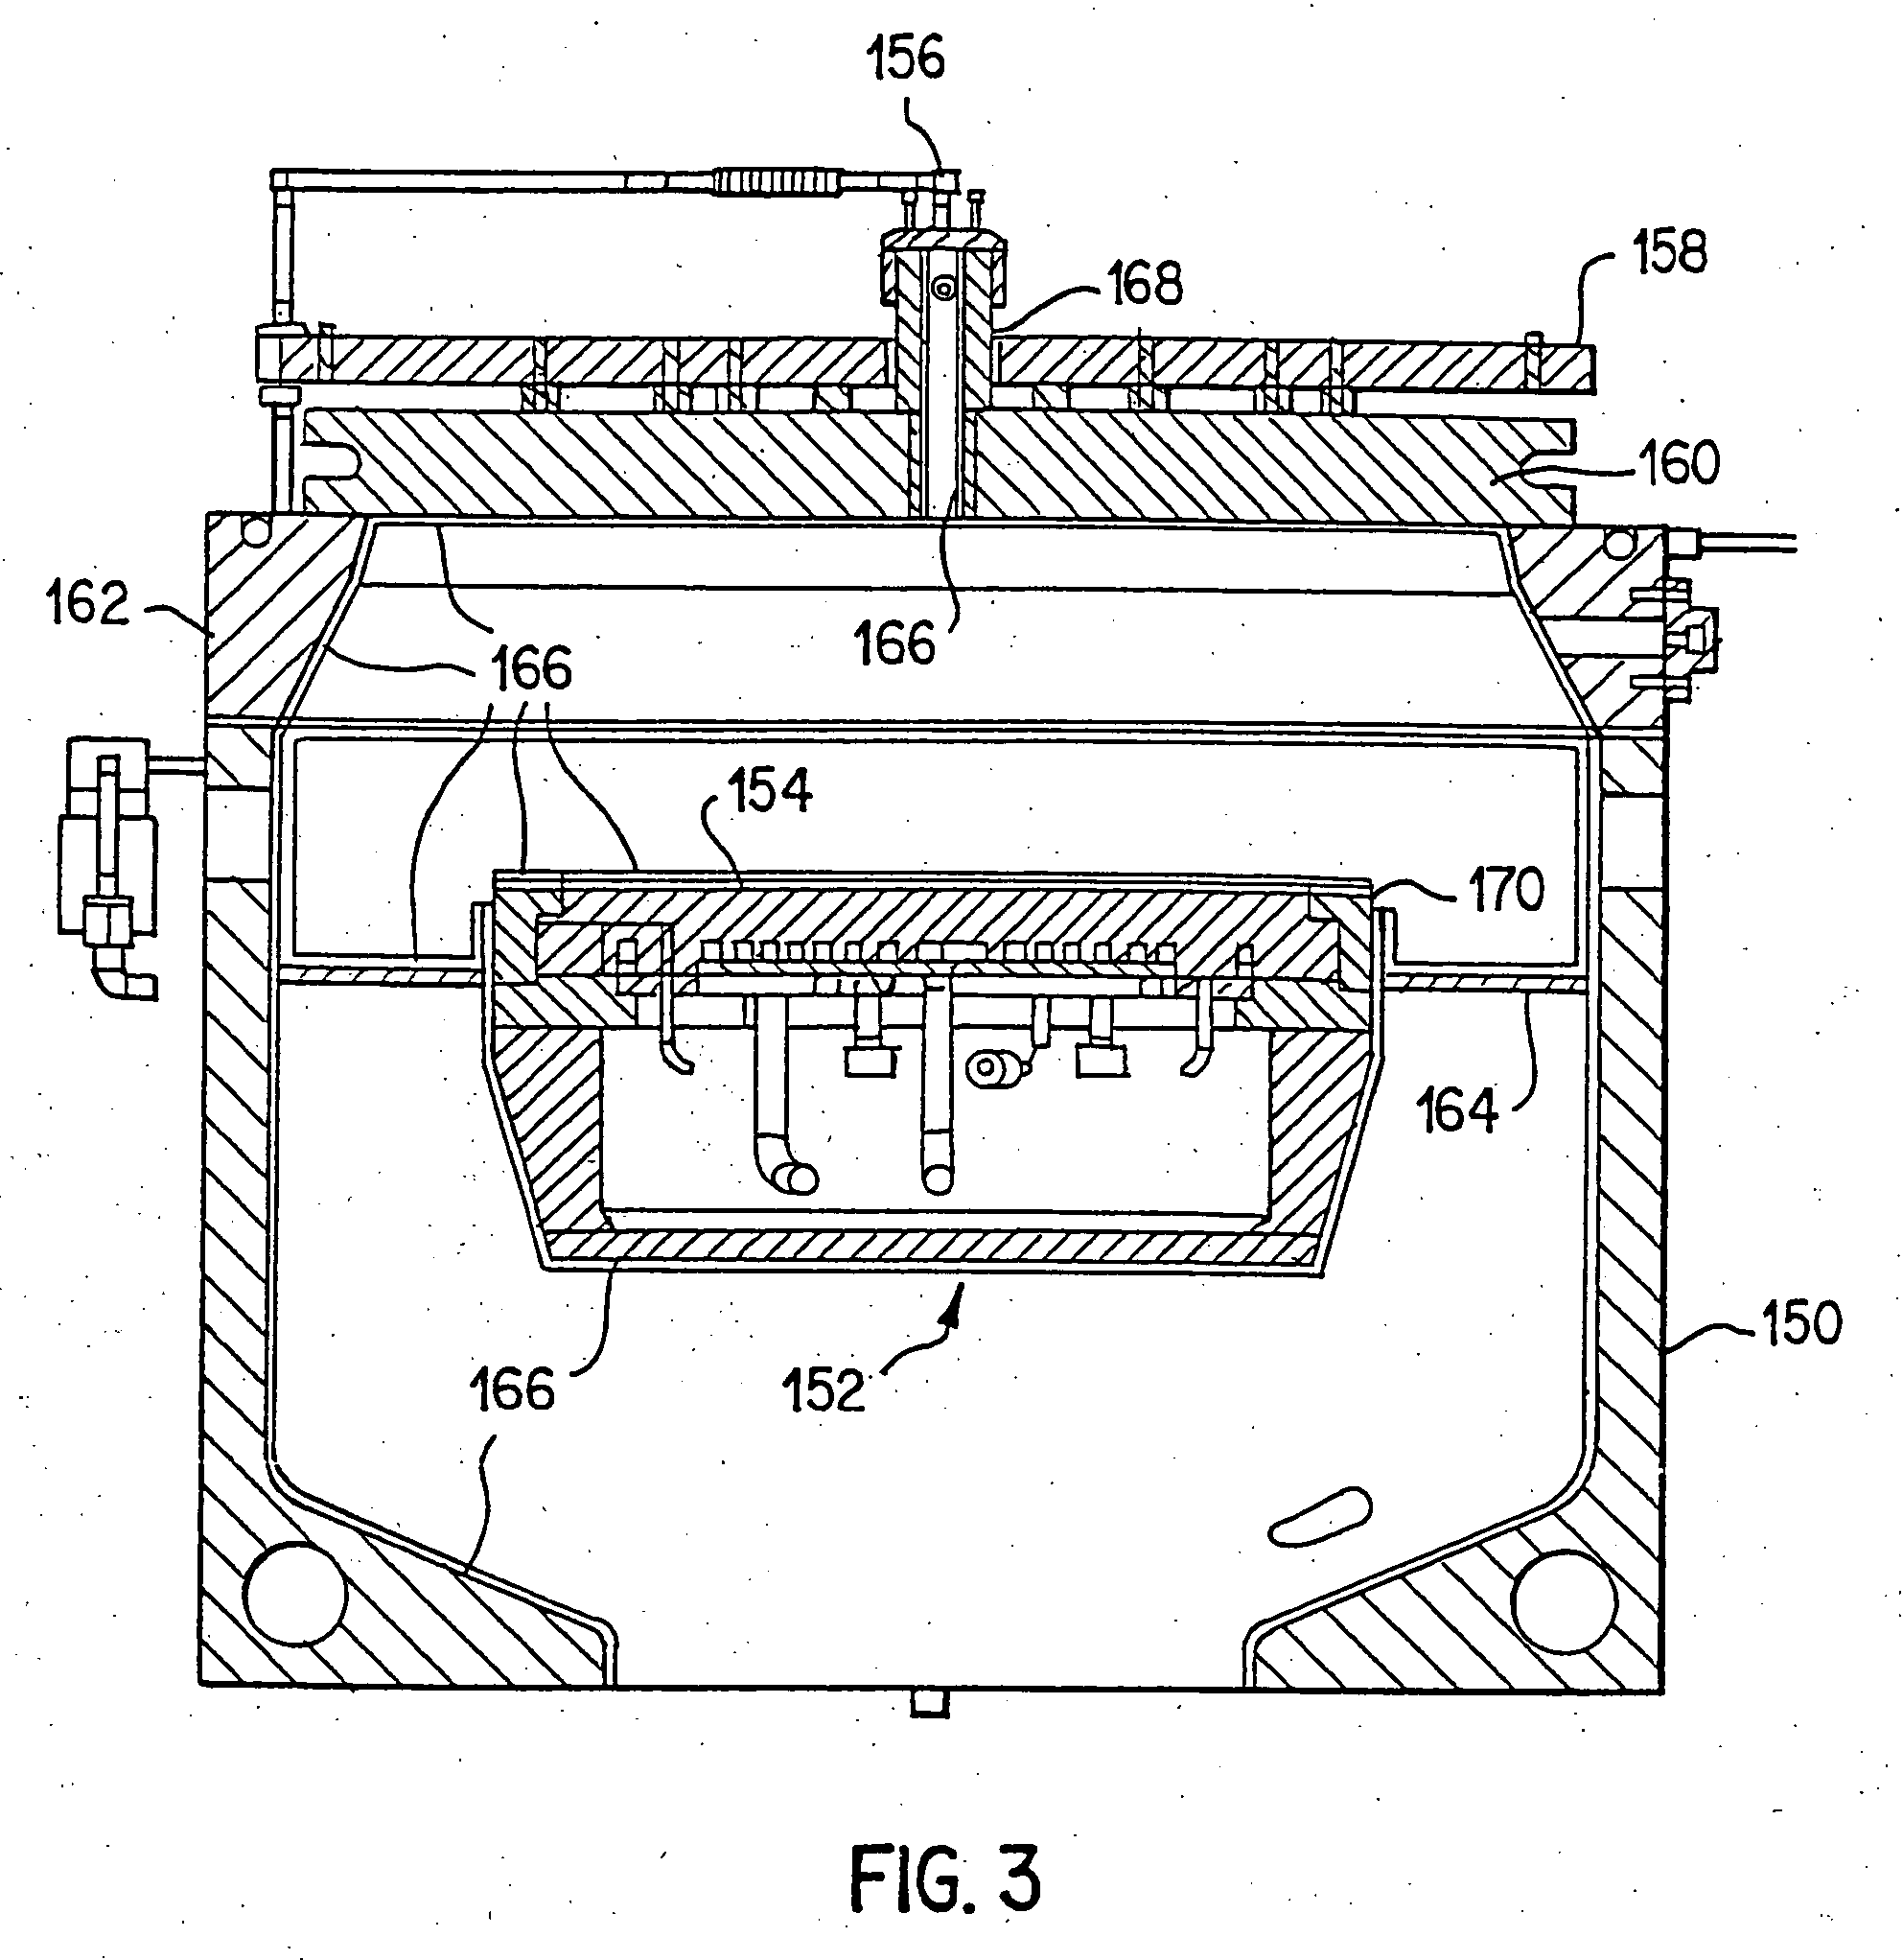 Low contamination components for semiconductor processing apparatus and methods for making components